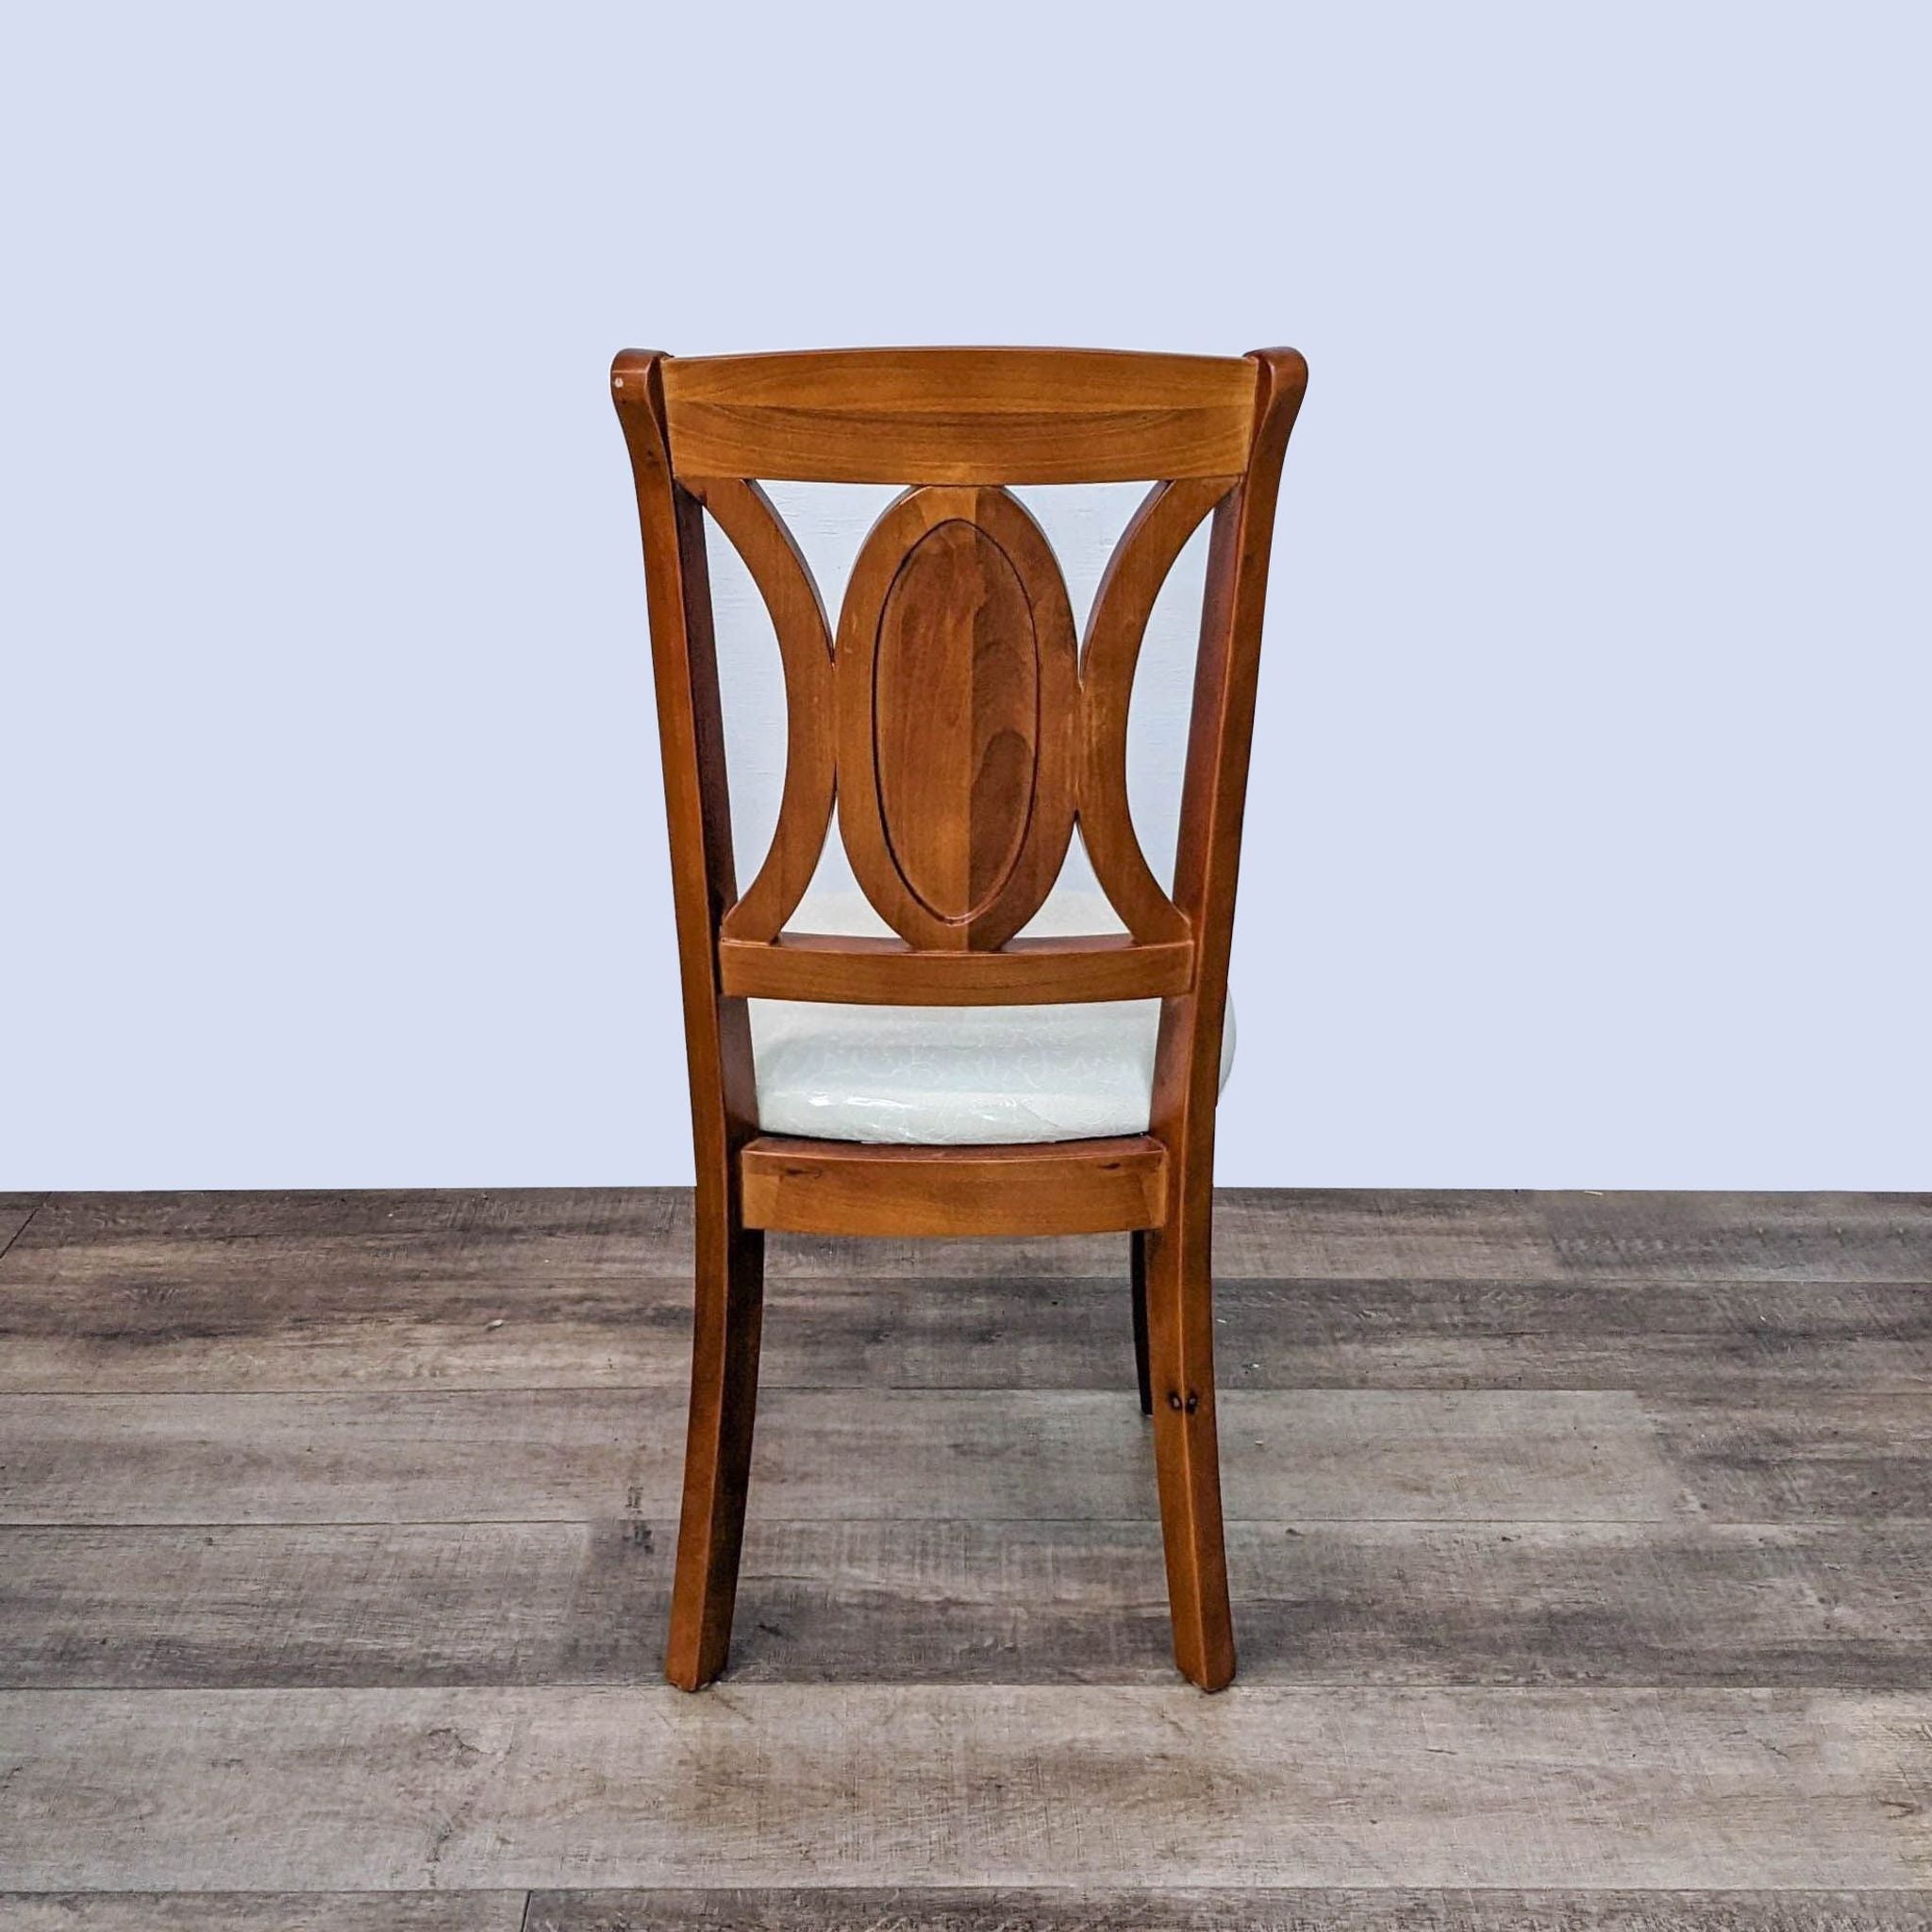 Reperch contemporary dining chair with wood frame and cream upholstered seat.